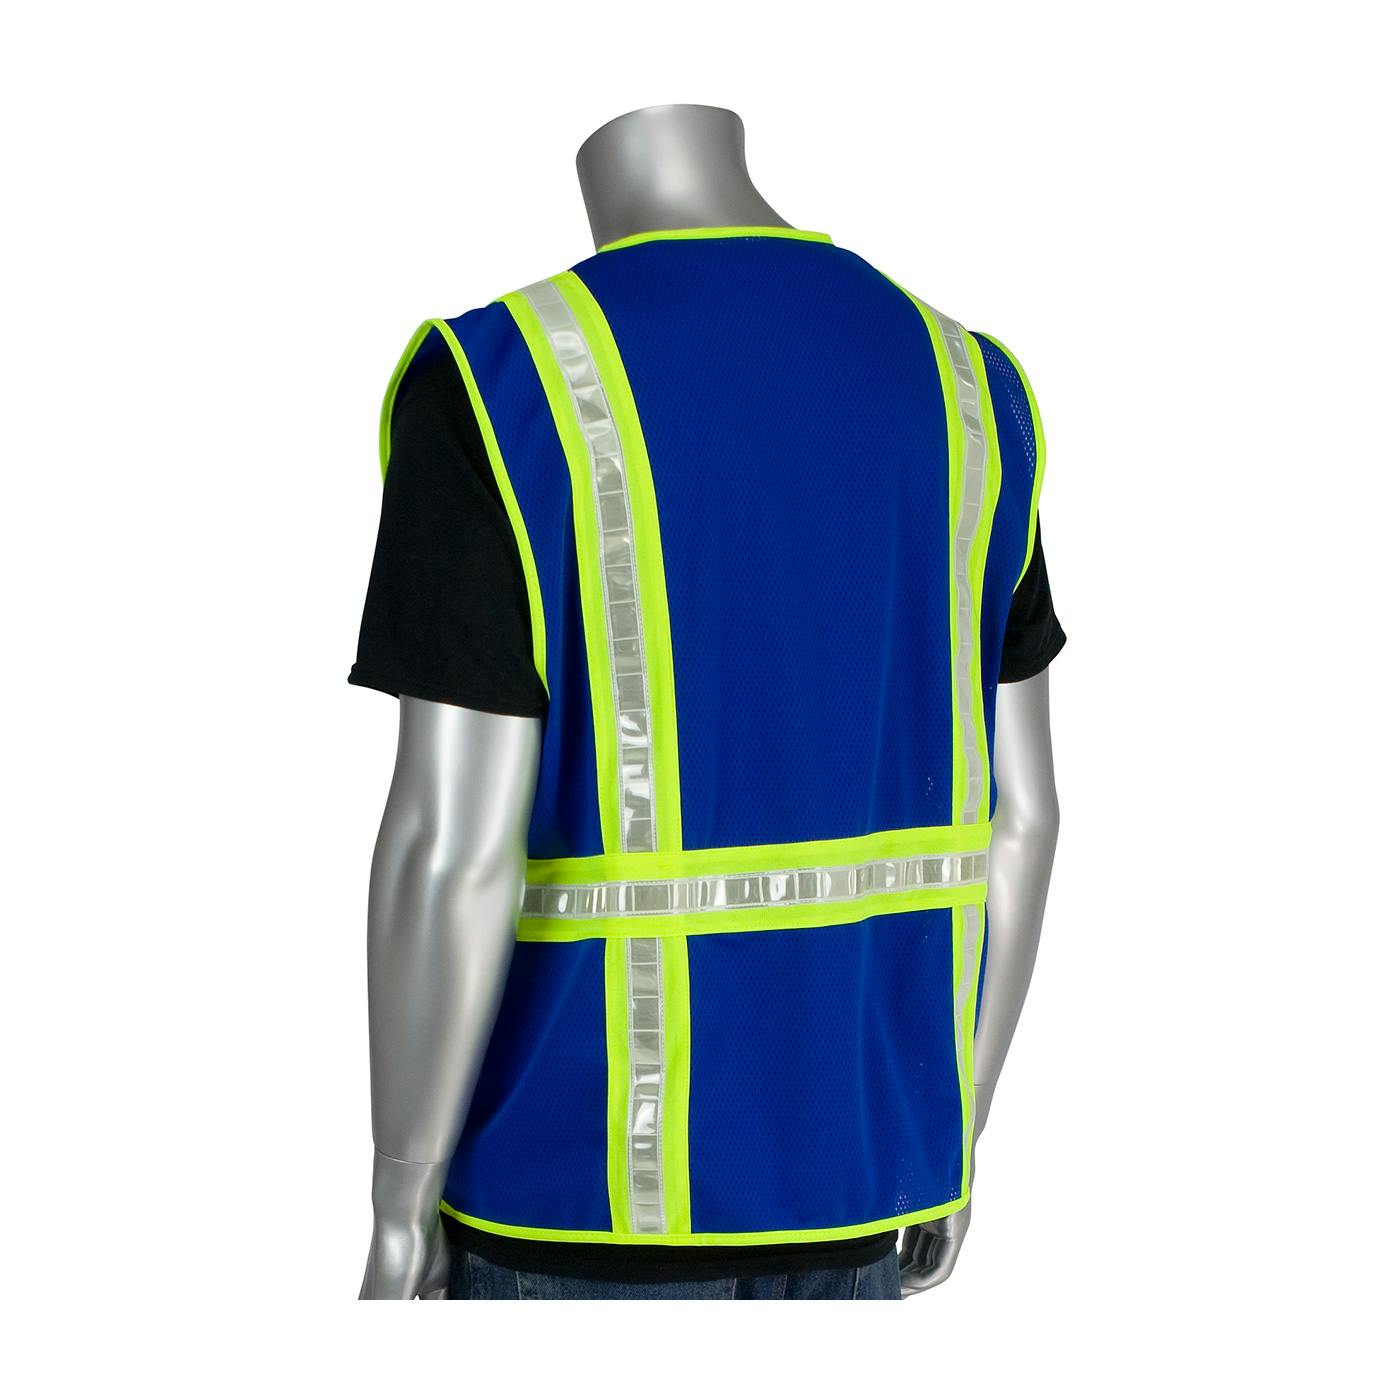 Non-ANSI Surveyor's Style Safety Vest with a Solid Front, Mesh Back and Prismatic Tape, Blue (300-1000)